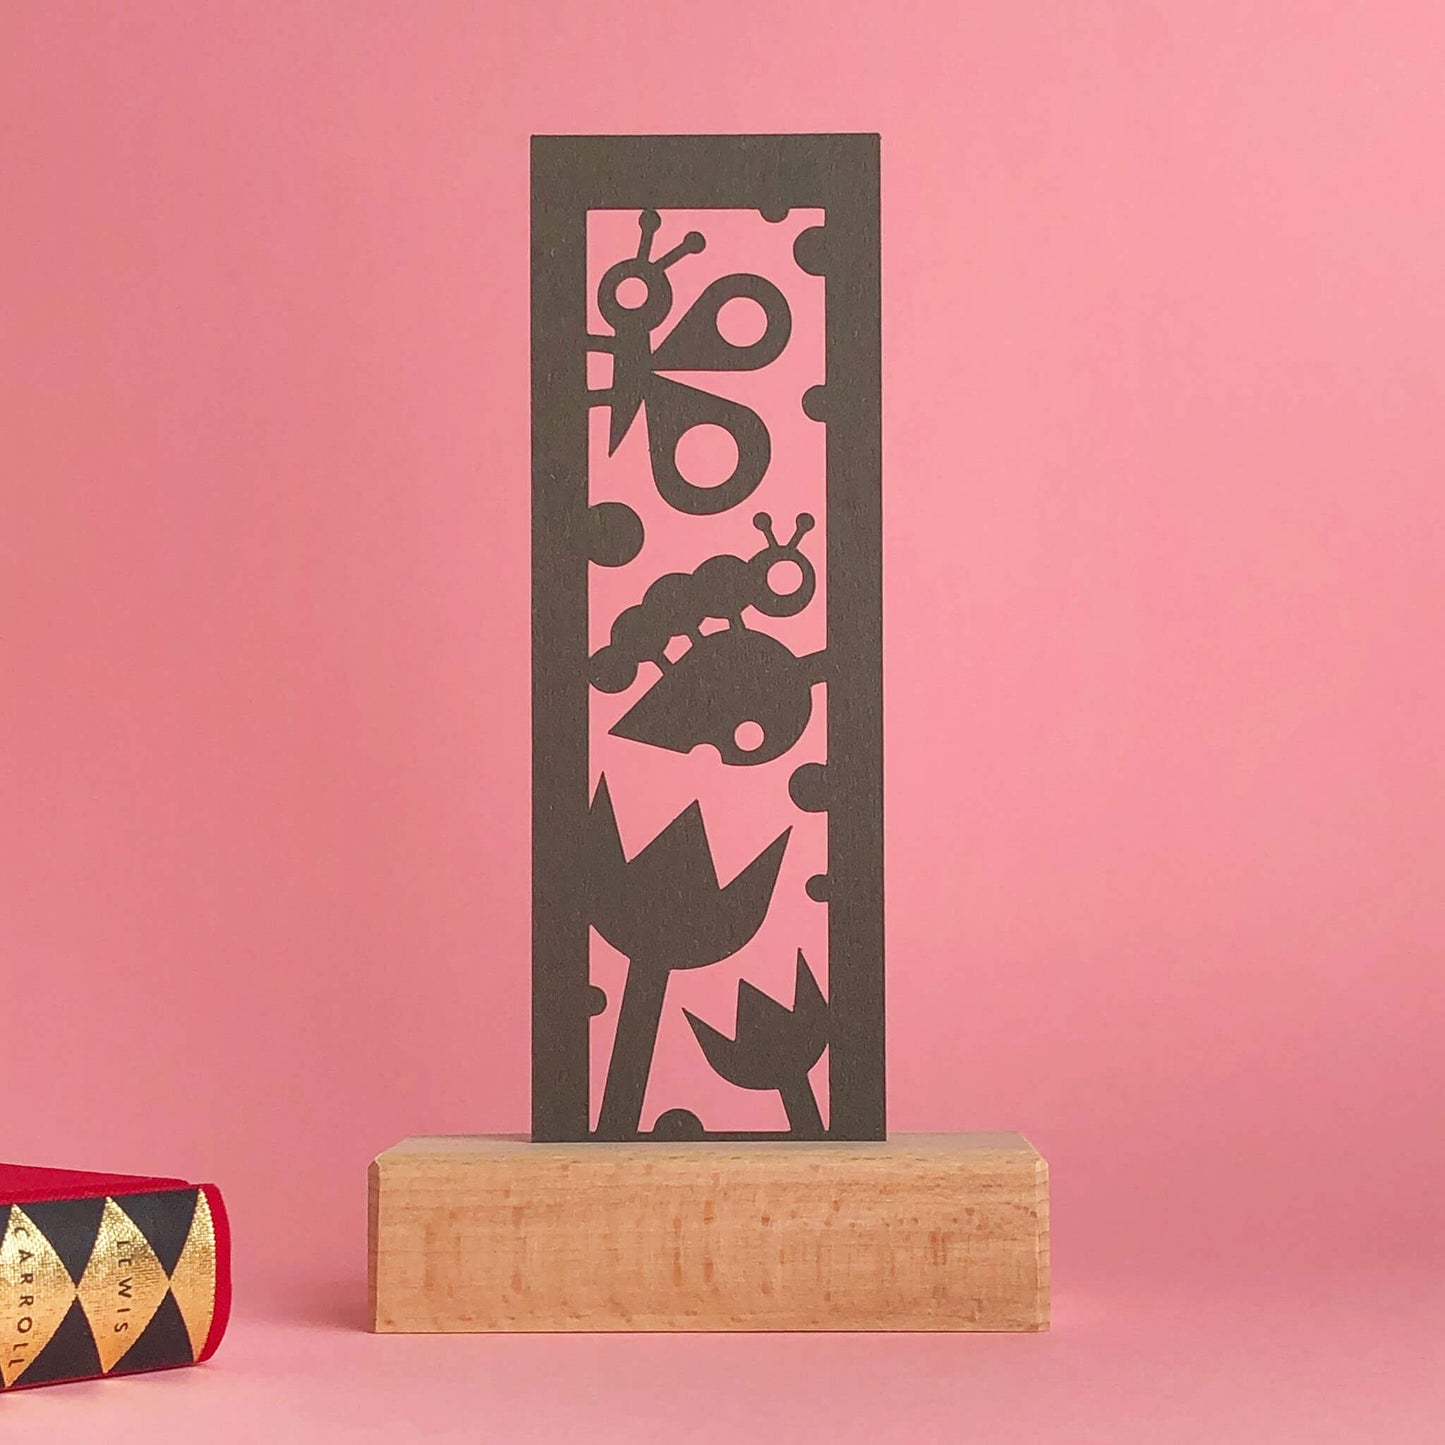 A wooden art display features a brown paper bookmark with a tulip, butterfly and caterpillar cut-out design. A glimpse of a book can be seen beside the bookmark against a pink background.